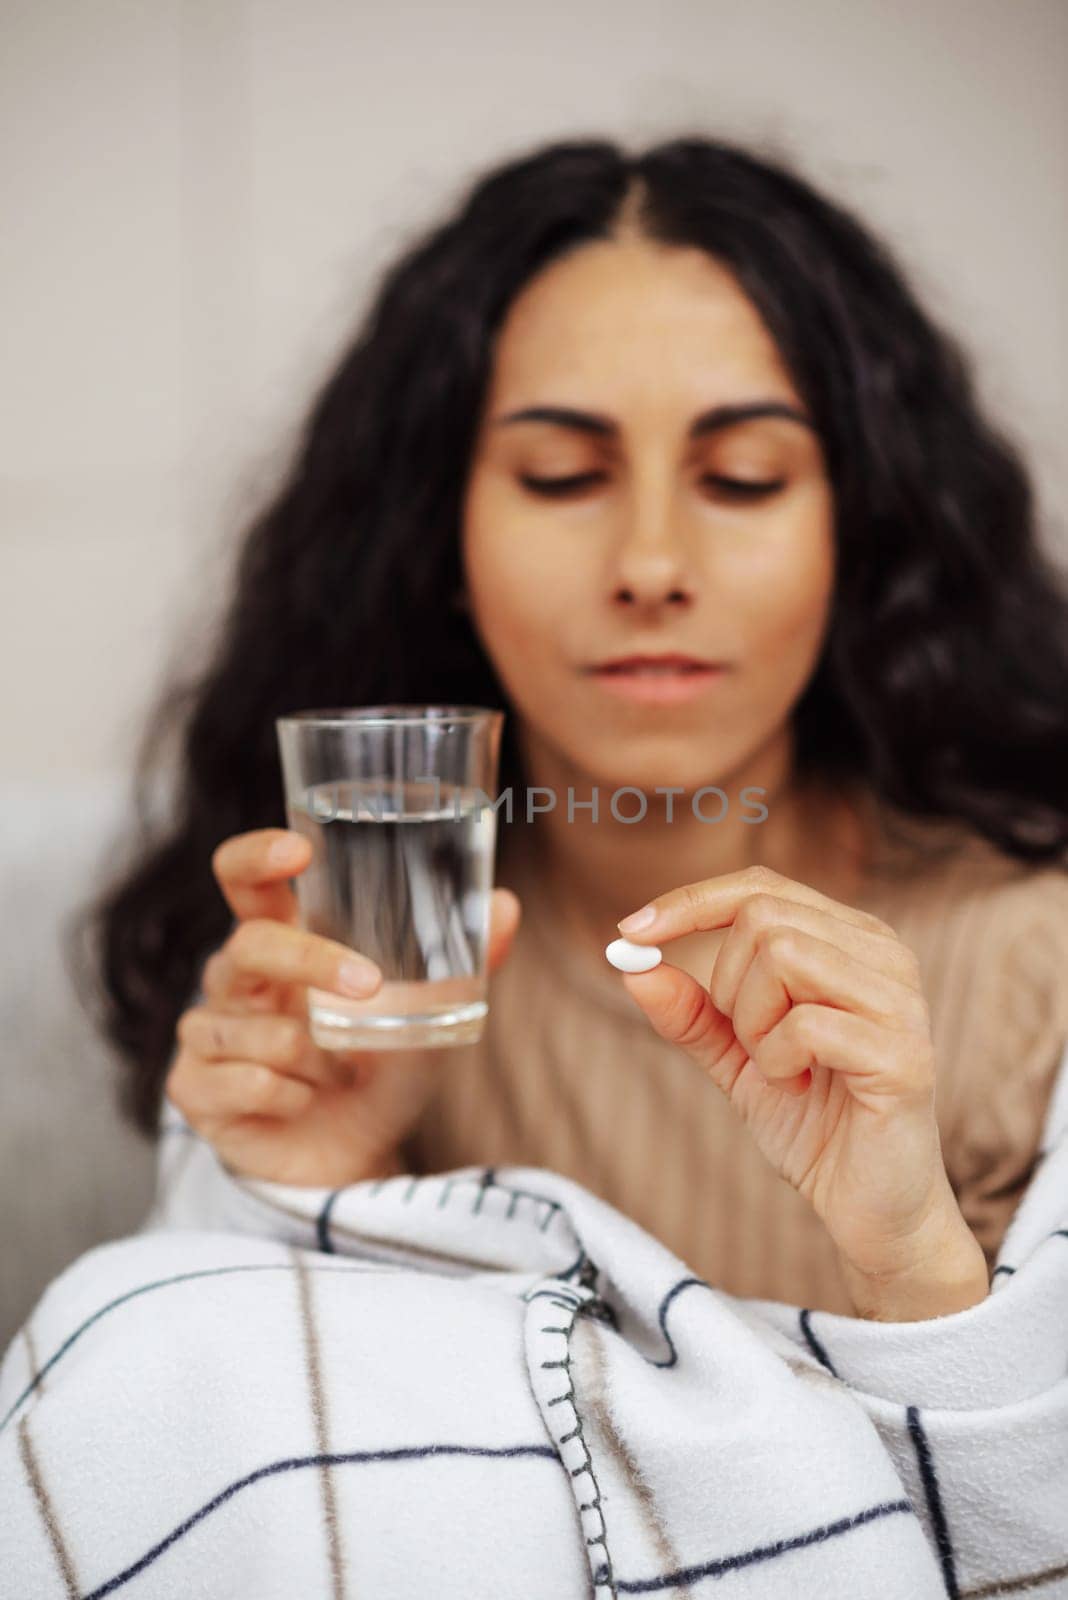 Beautiful young woman holding a pill and water. In the foreground a glass of water and a pill between the fingers. In the background is an Arab woman looking at a pill. The girl thought about taking medicine. Woman about to take medication. A young girl Got sick with the flu or a virus or possibly any form of allergy. A pill, a glass of water and a warm blanket is all she needs right now.